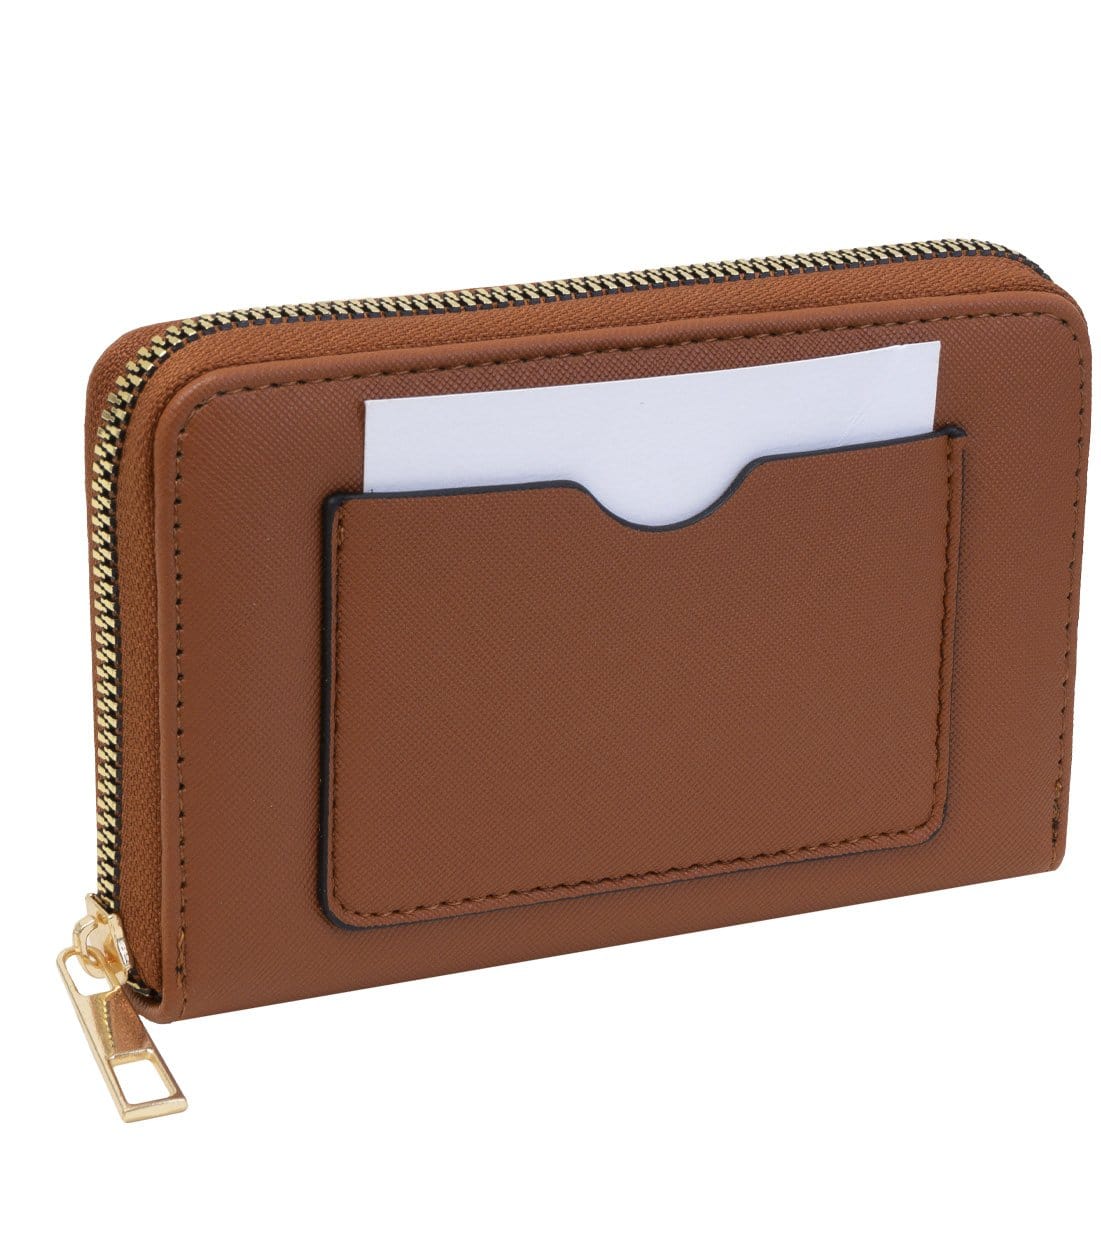 Rebecca & Rifka Vegan Saffiano Leather Zip Around Compact Indexer Wristlet Wallet With Back Credit Card Slot